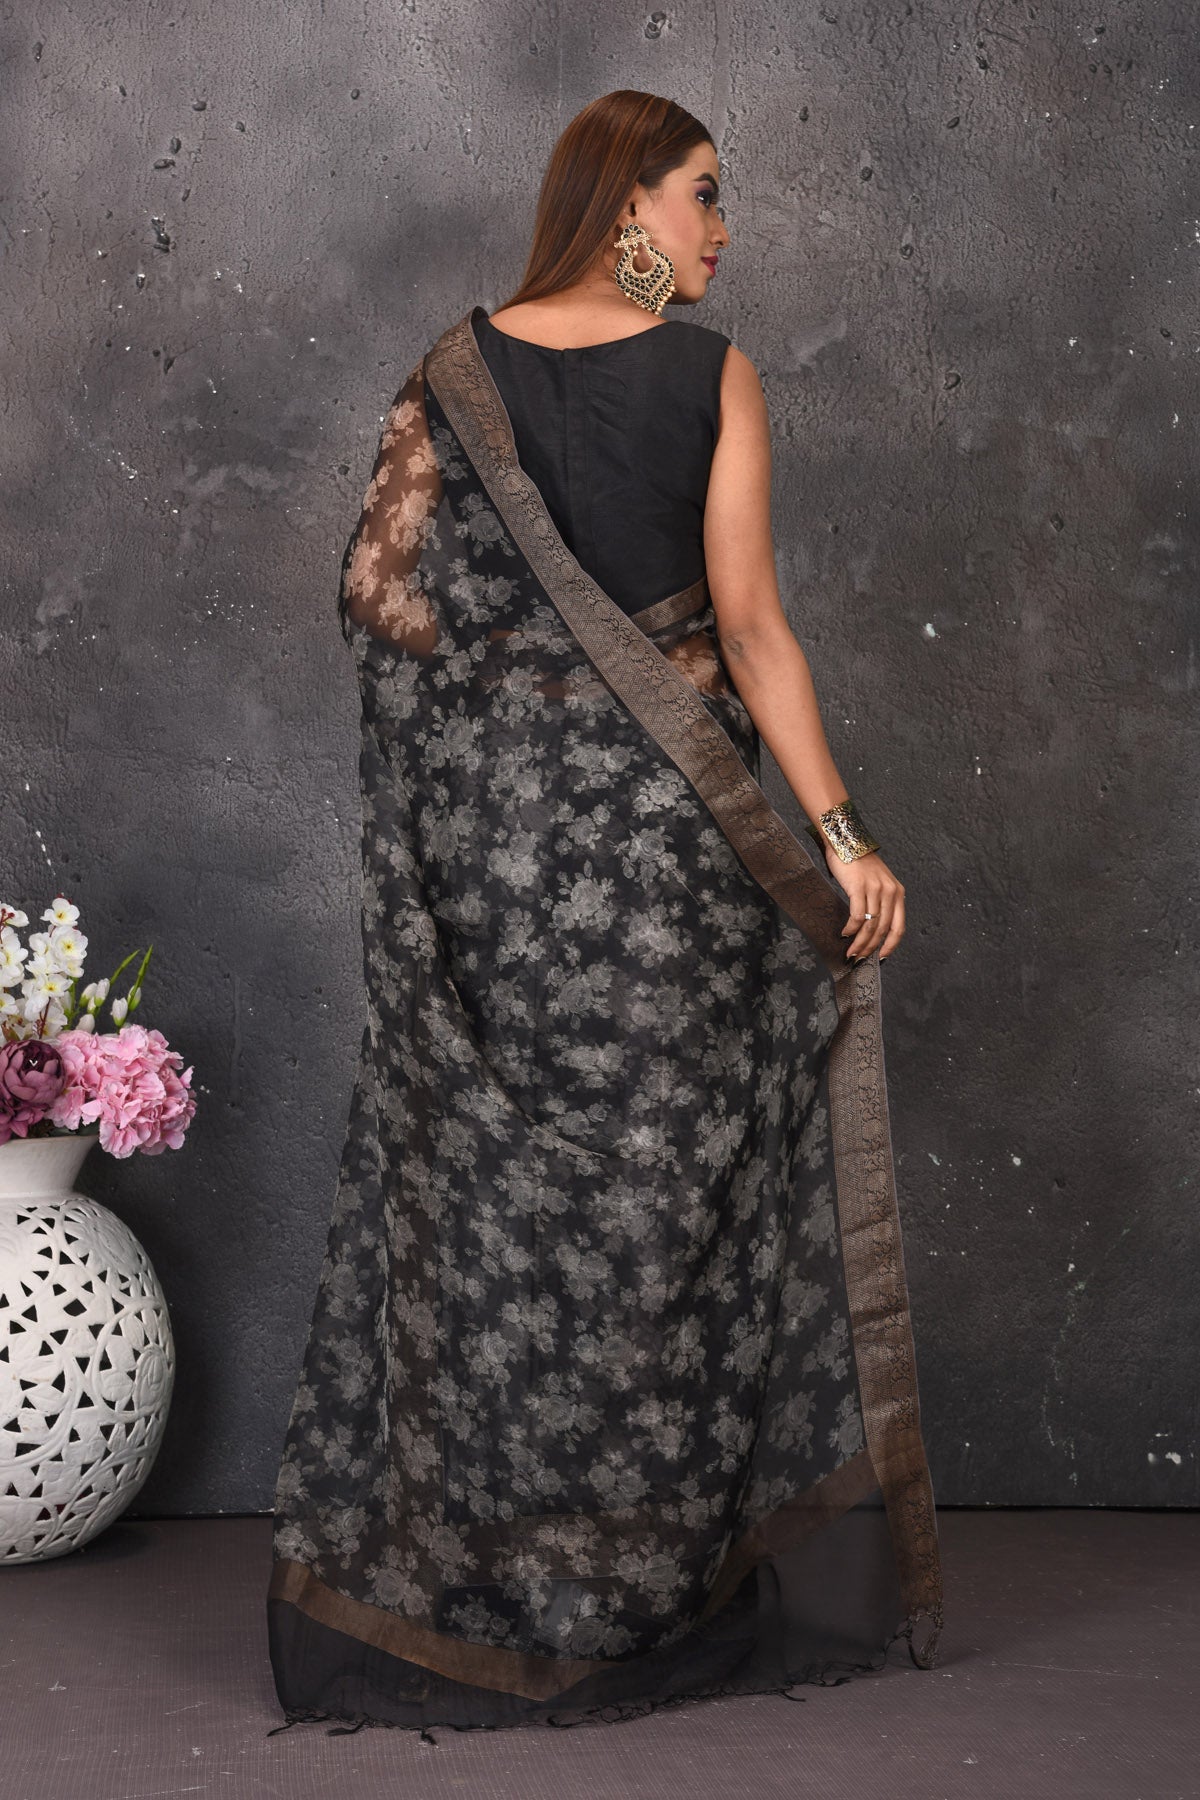 Buy stunning black and white printed saree online in USA with zari border. Keep your ethnic wardrobe up to date with latest designer sarees, pure silk sarees, handwoven sarees, tussar silk sares, embroidered sarees from Pure Elegance Indian saree store in USA.-back